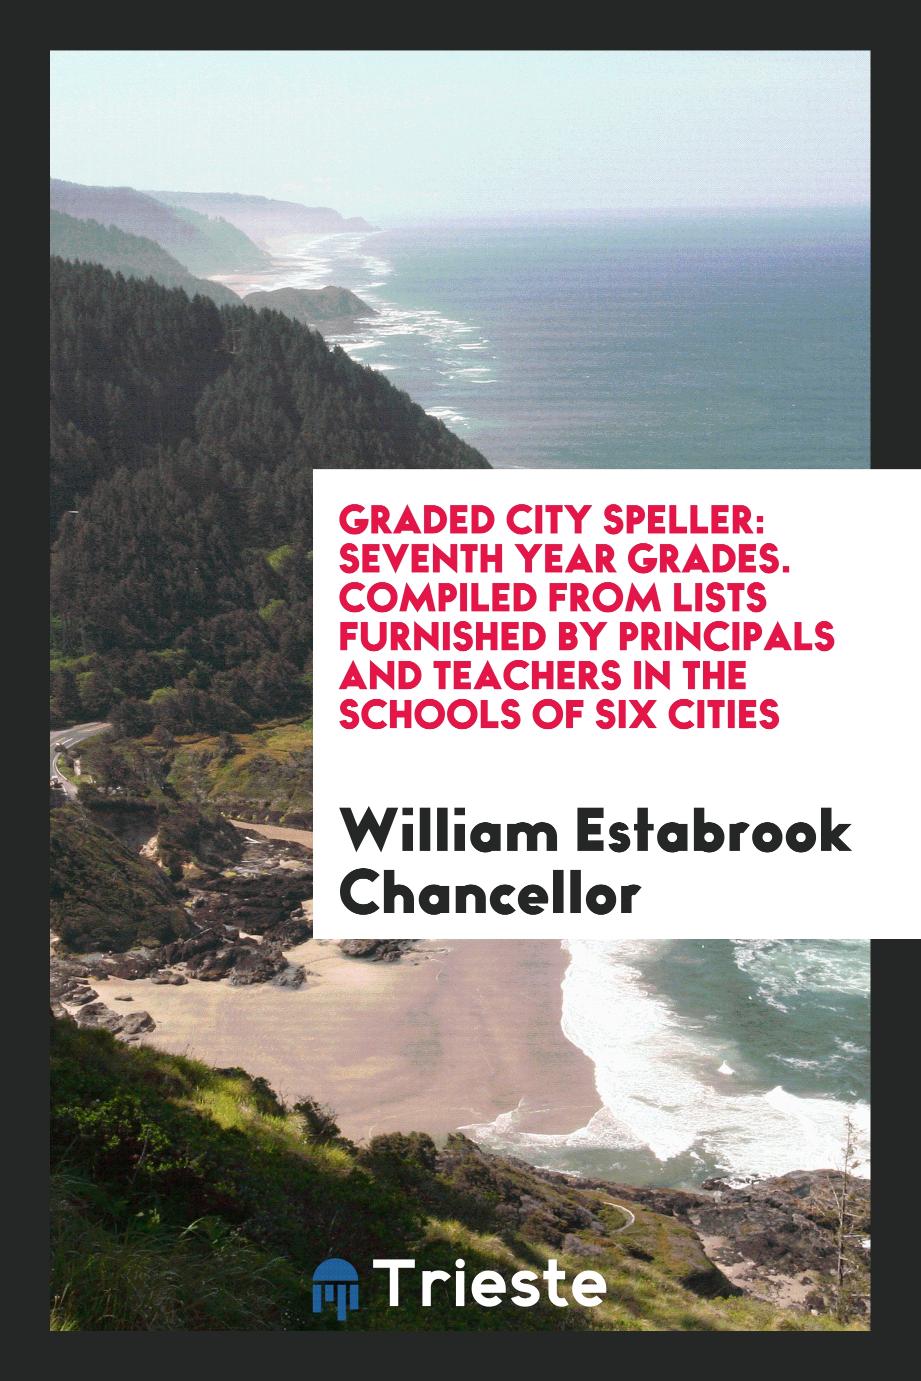 Graded City Speller: Seventh Year Grades. Compiled from Lists Furnished by Principals and Teachers in the Schools of Six Cities